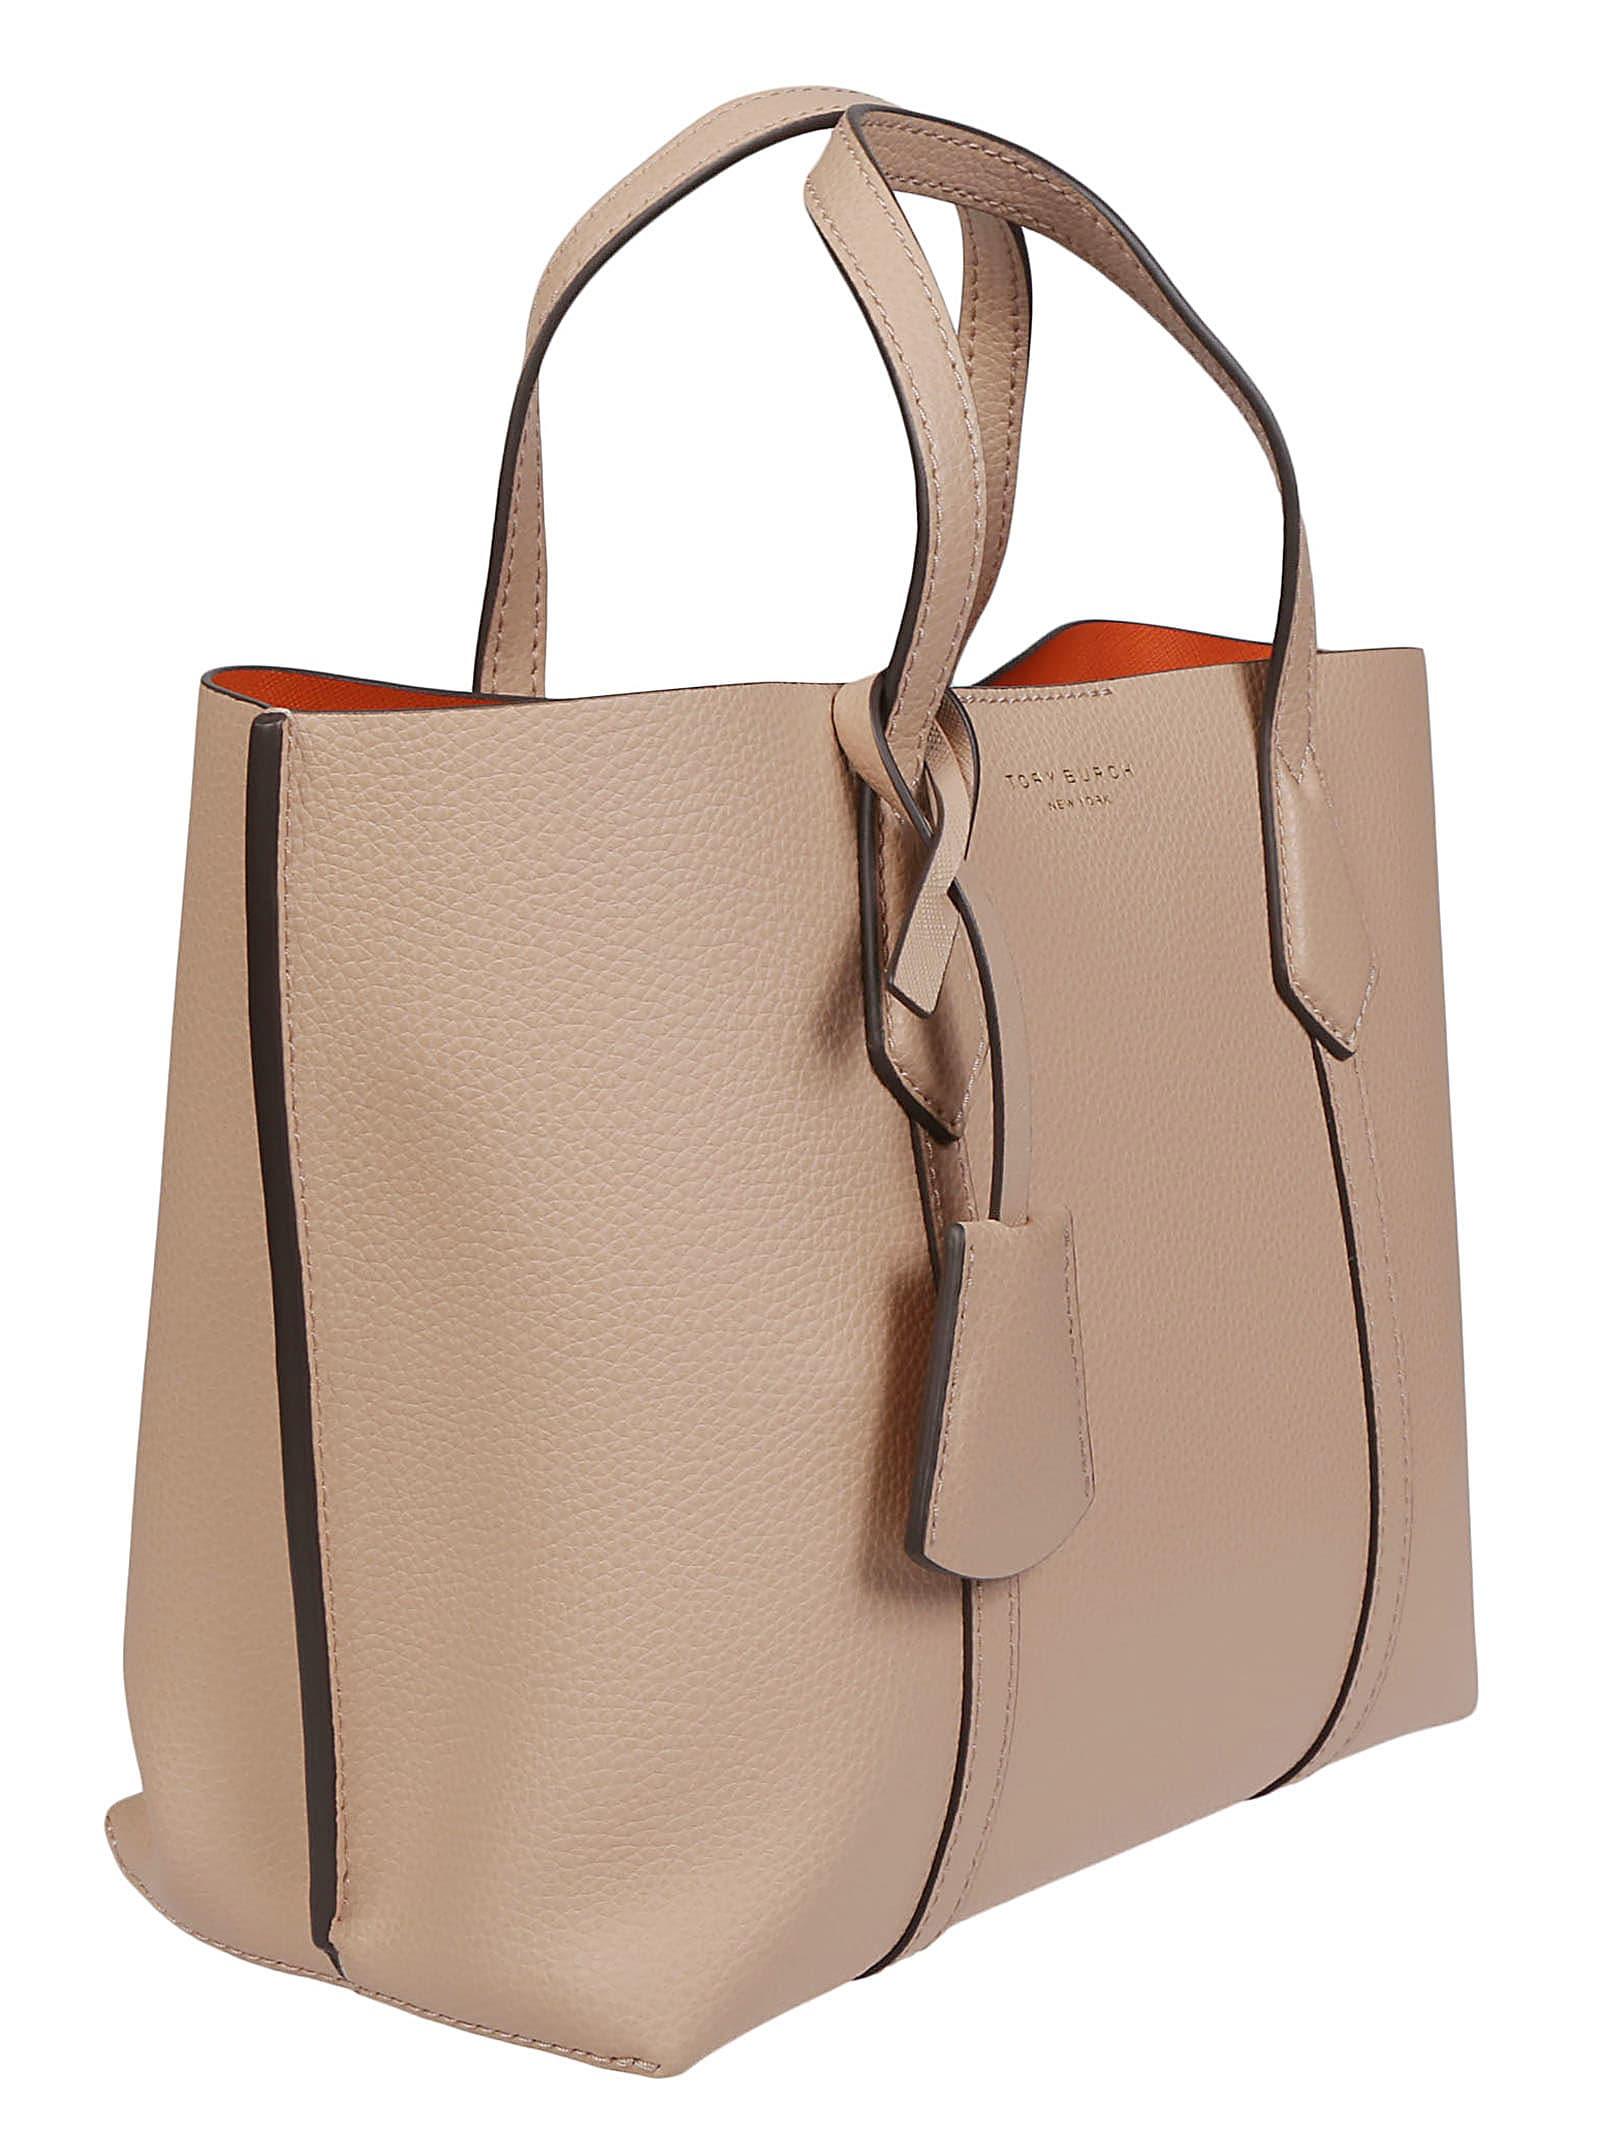 Tory Burch Small Perry Triple-compartment Tote Bag in Natural